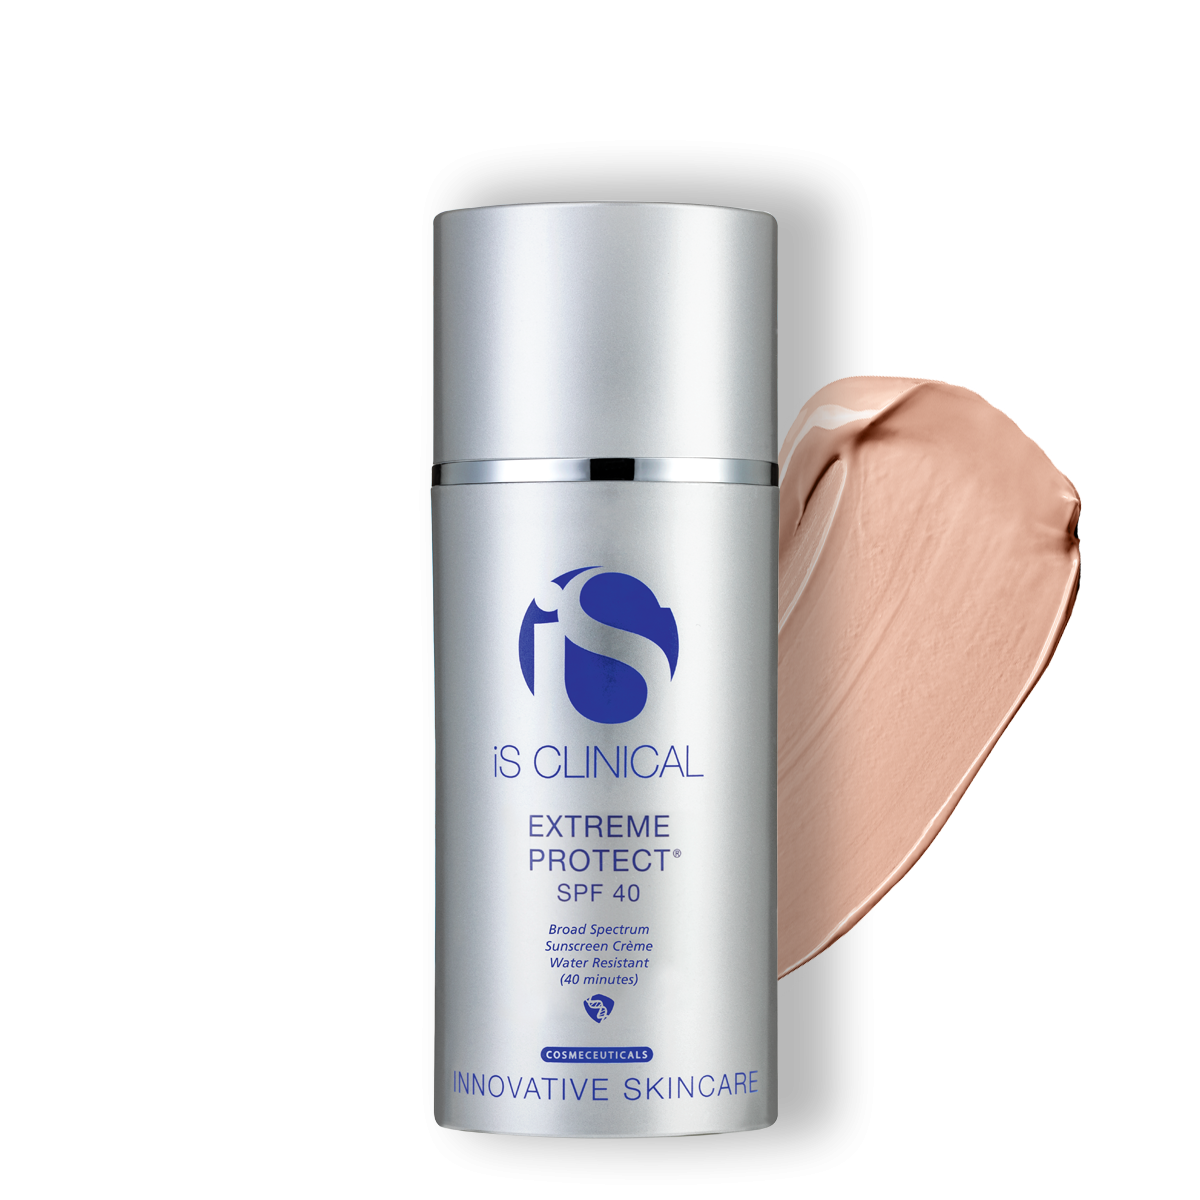 iS Clinical Extreme Protect SPF 40 - best known for being an RESTORATIVE, ALL-PHYSICAL SUNSCREEN with ULTIMATE PROTECTION. Shown in beige.